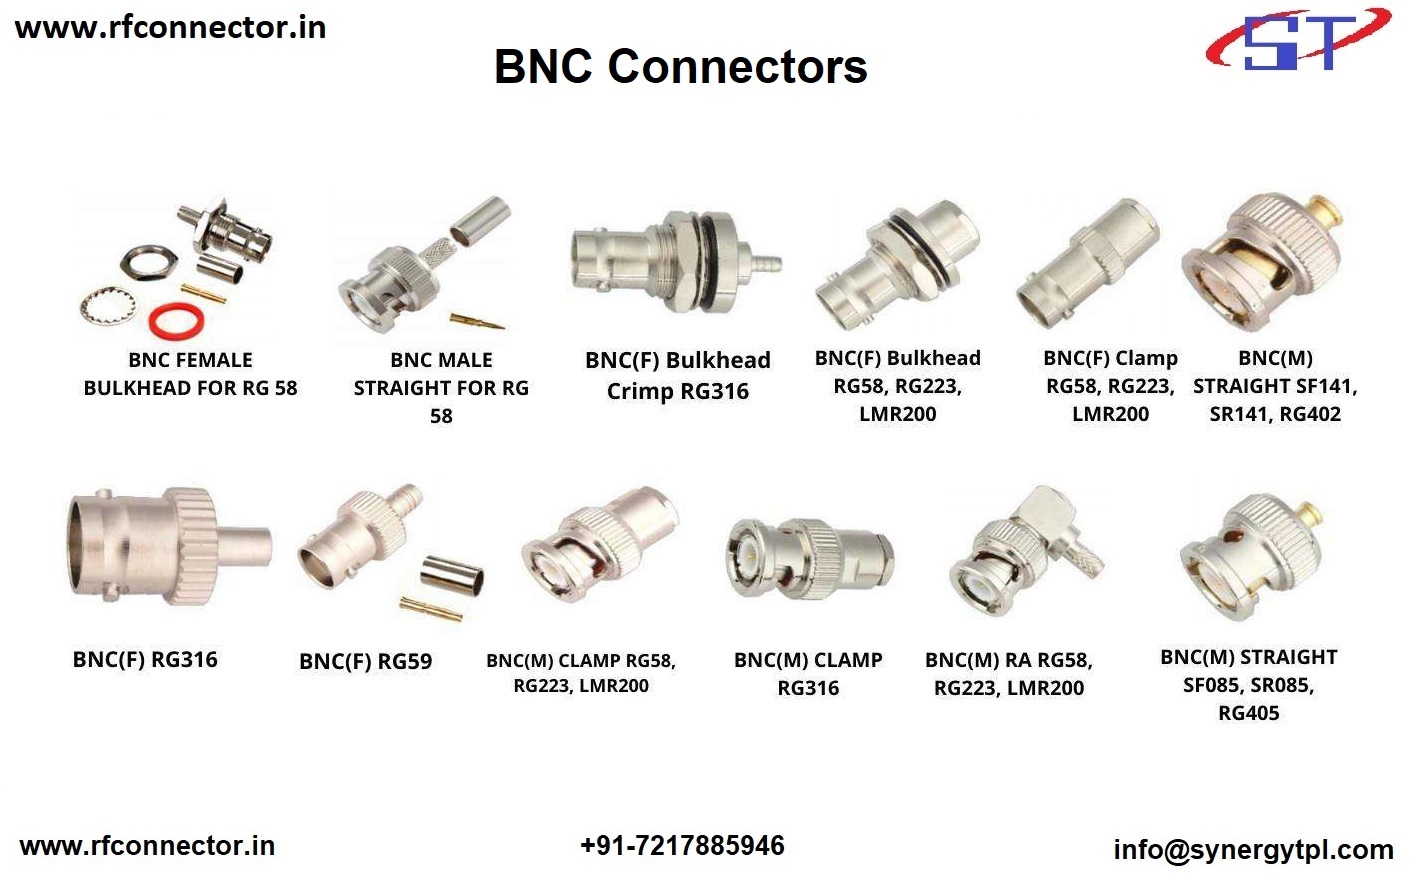 BNC female crimp connector for BT - 3002 cable